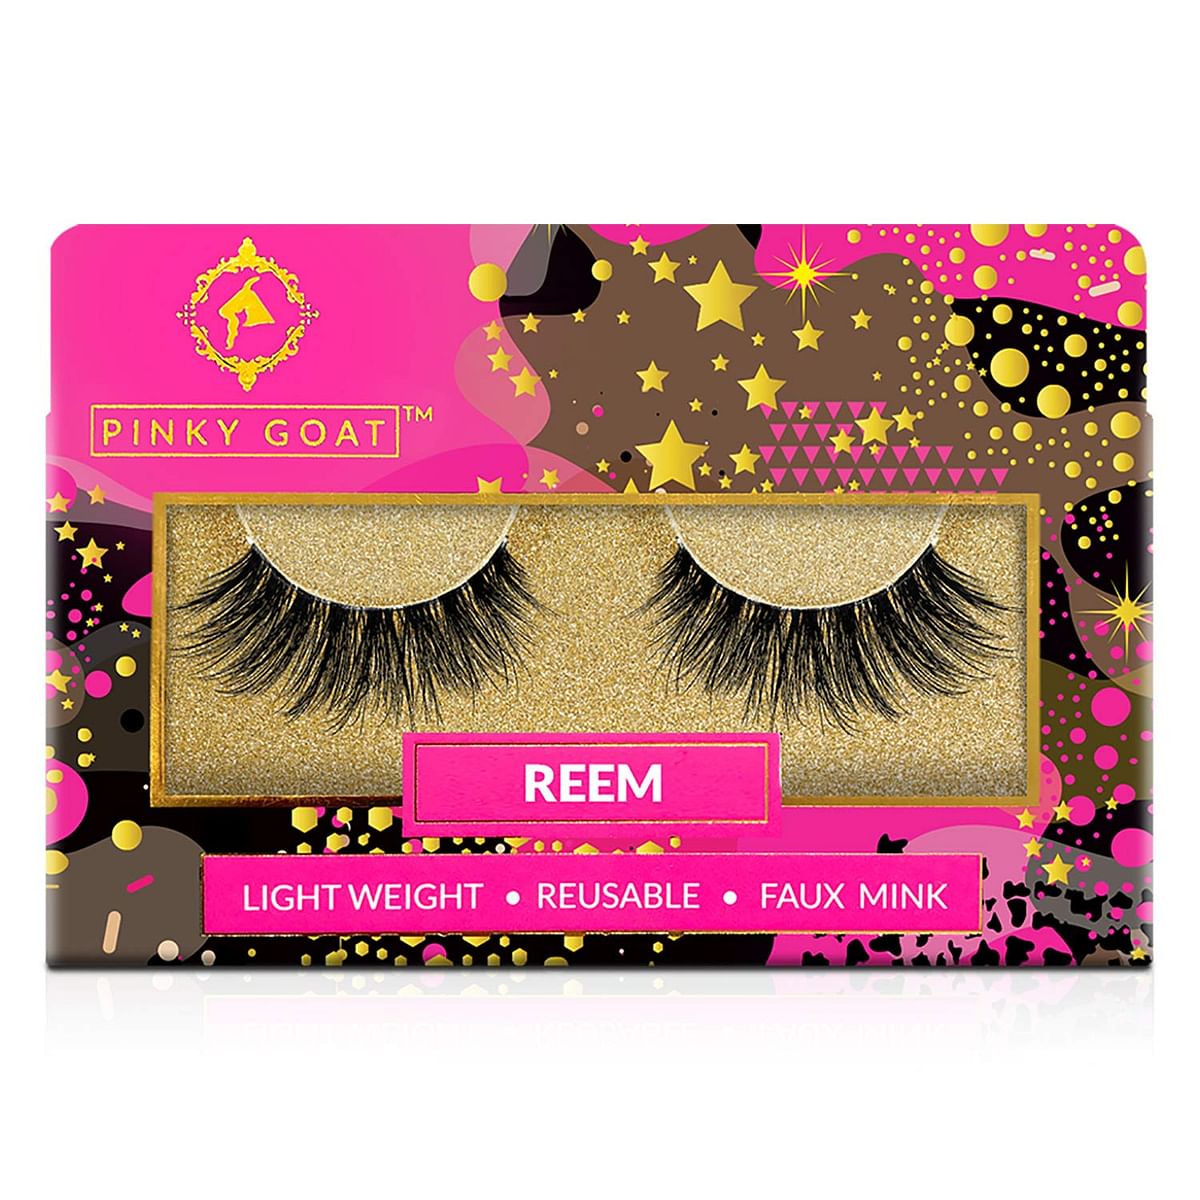 Add to Favourites Pinky Goat Reem Party Lash